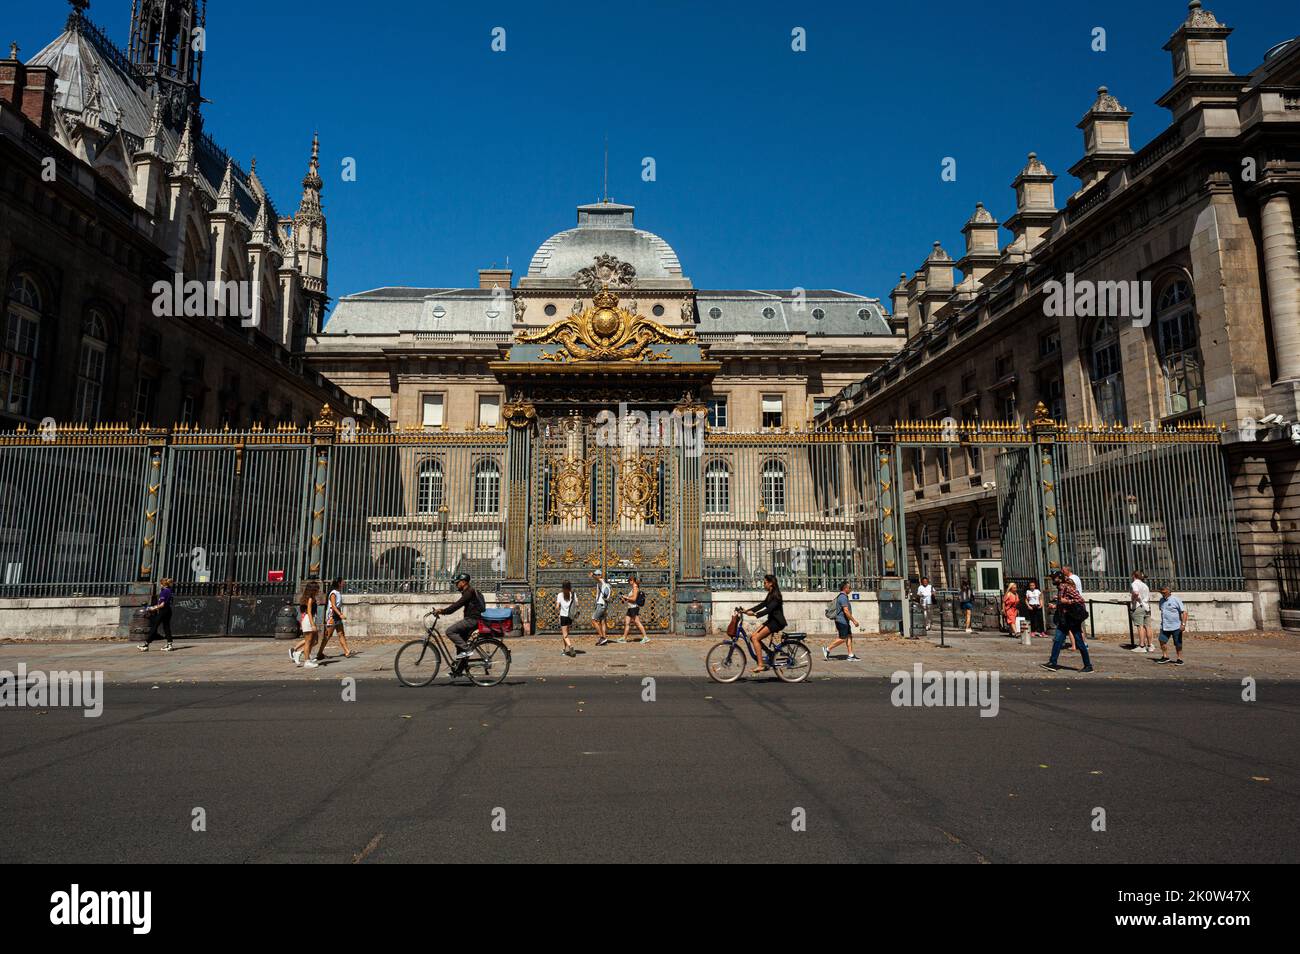 Paris, France - July, 15: View of the Palais de Justice. The palace is a historical building on the Ile de la Cite, that houses today various courts o Stock Photo